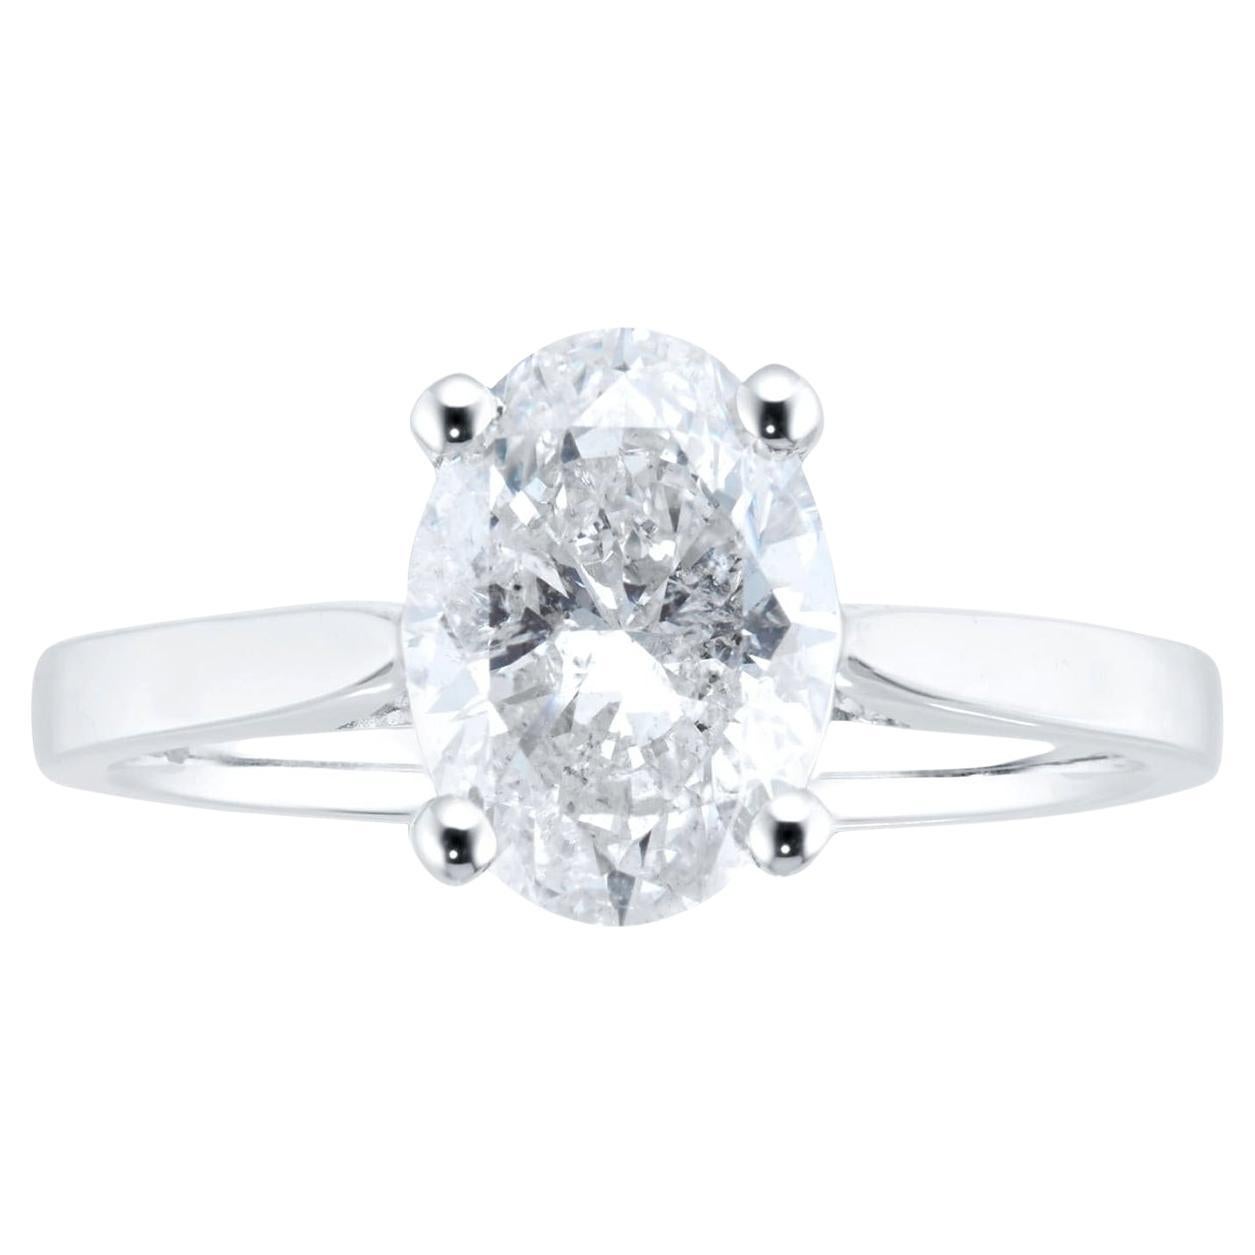 GIA 2.18 Natural Oval Cut Diamond Ring D Color I1 Clarity 4 Prong 18K White Gold